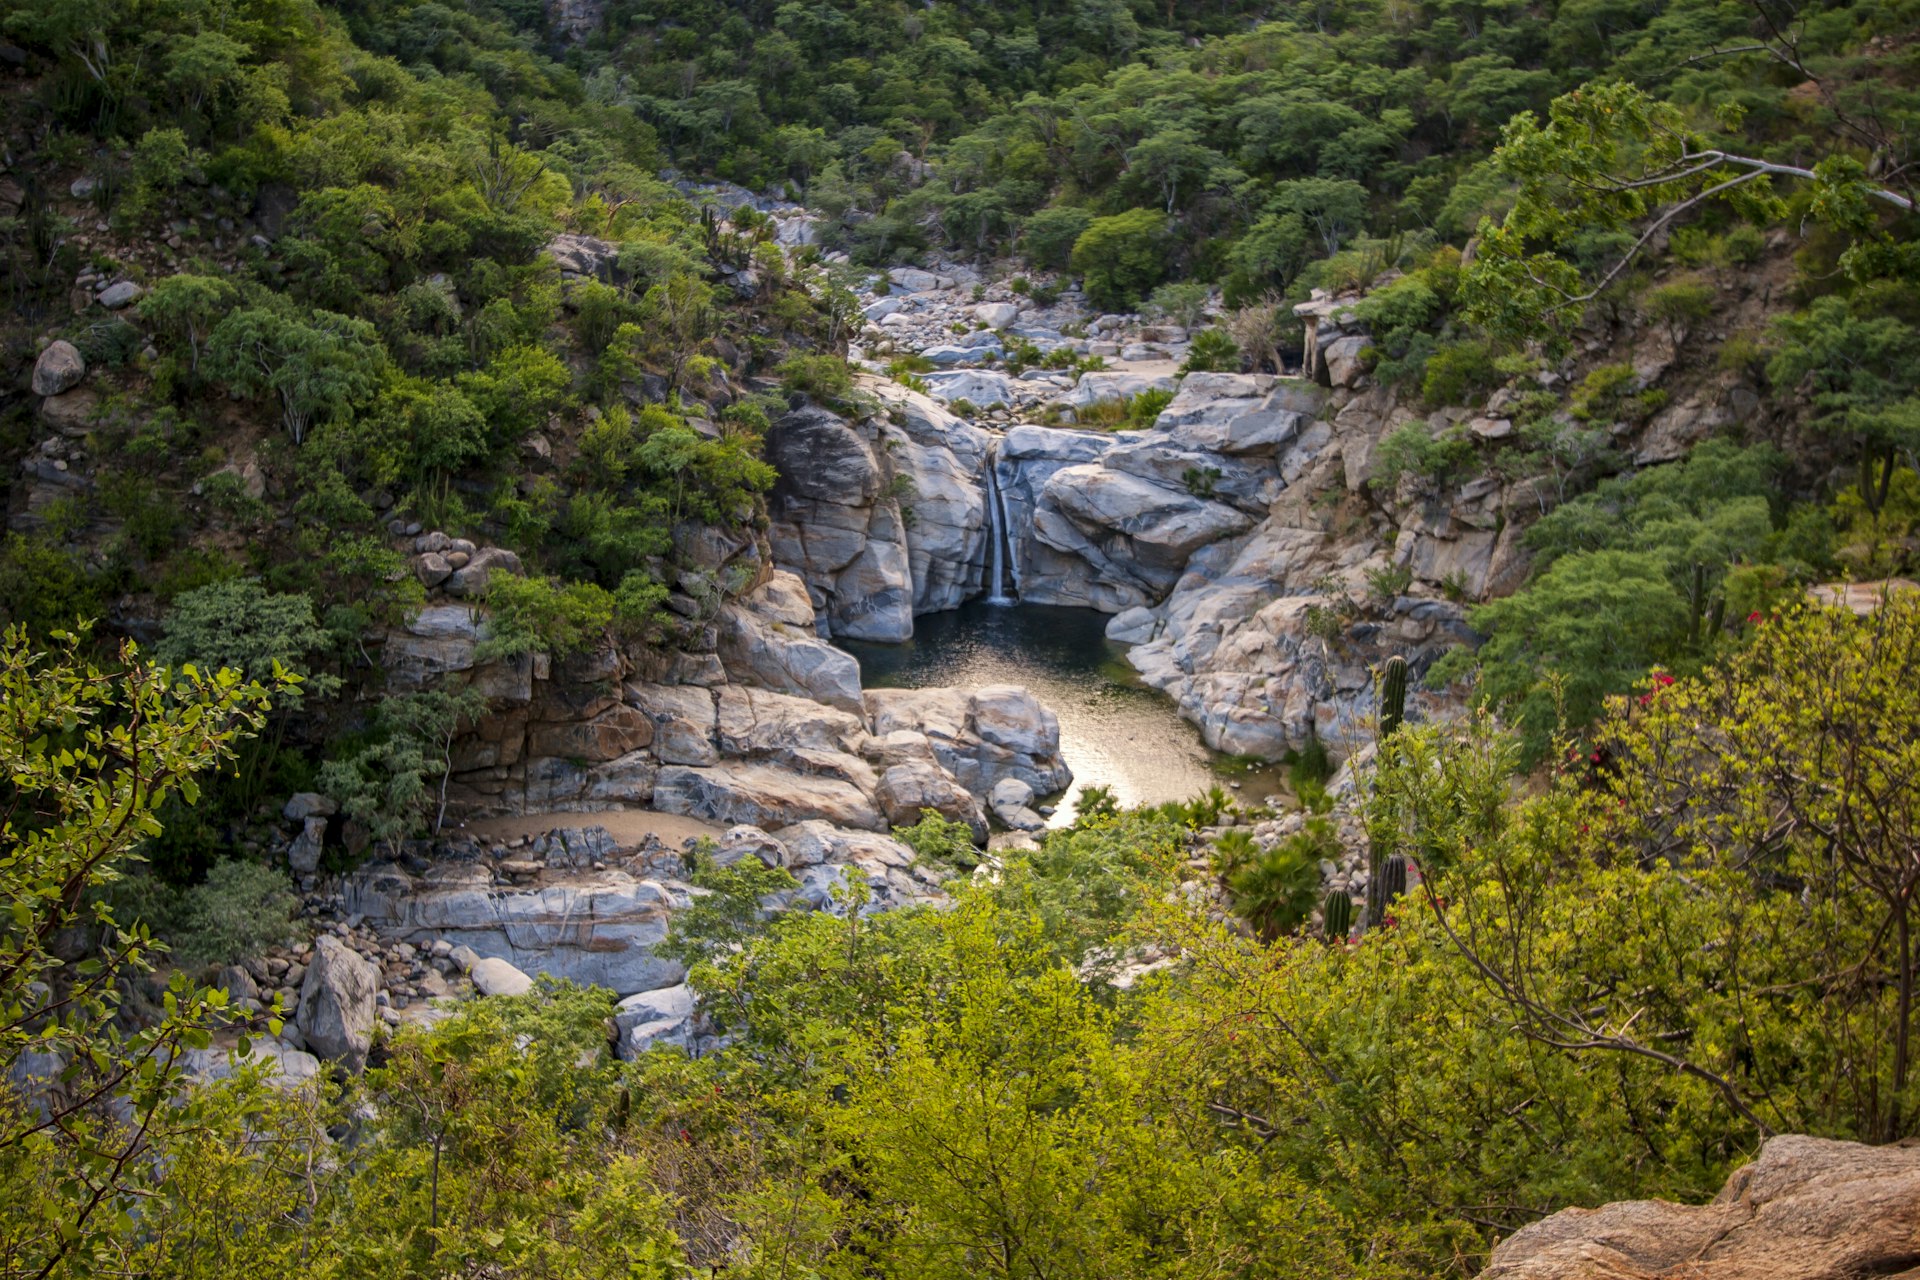 A river flows through rocky terrain in Cañon de la Zorra and empties into a large, tree-ringed pool Getty Images